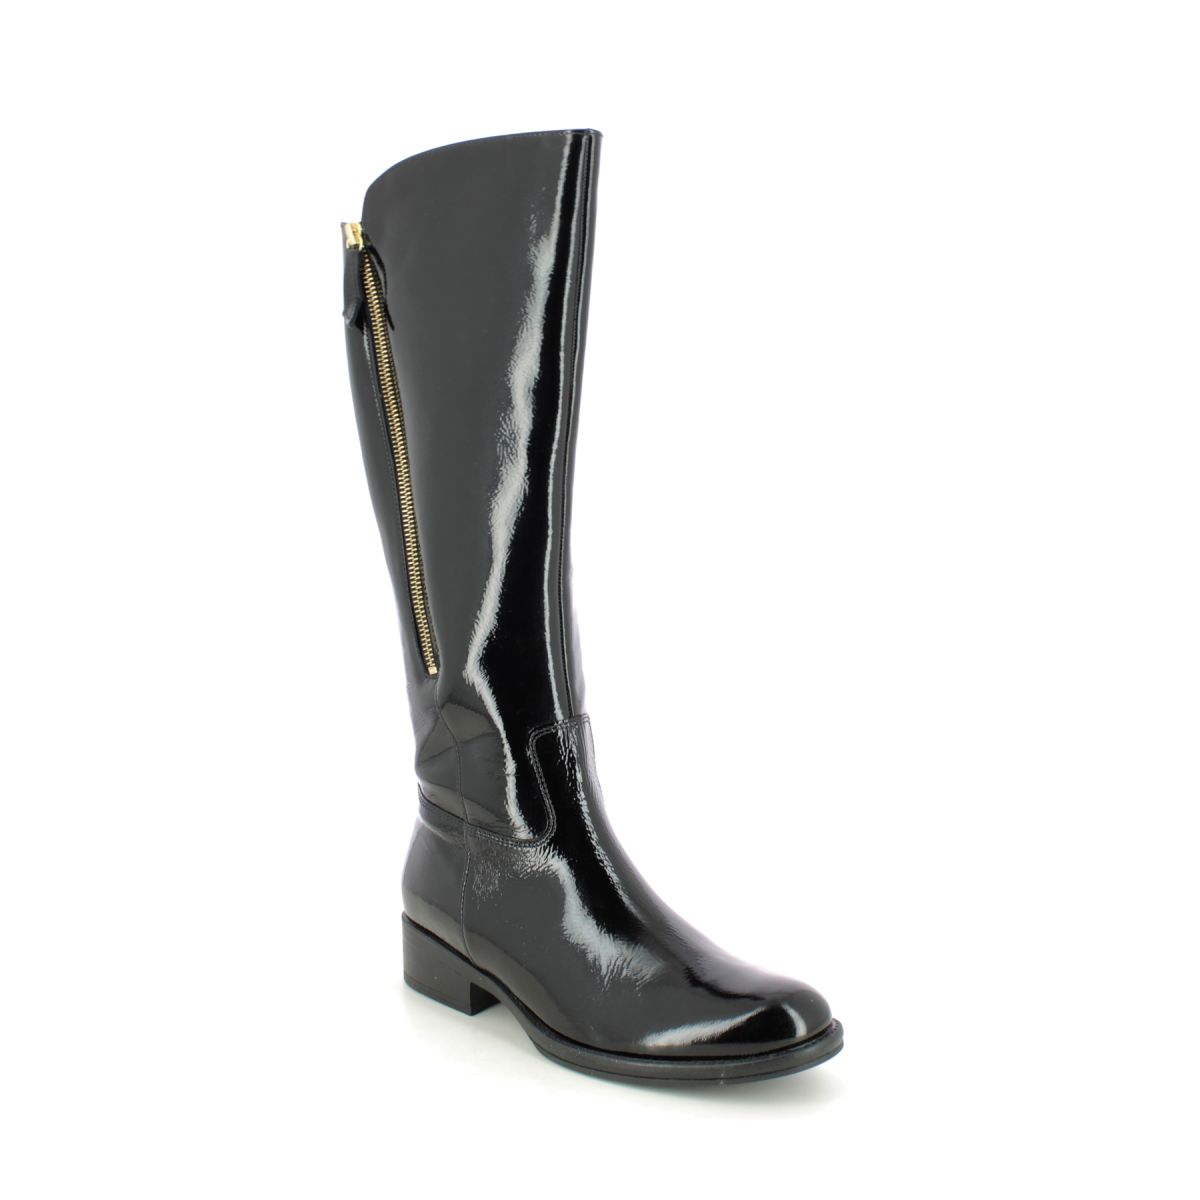 Gabor Adelina Zip Black patent Womens knee-high boots 91.605.97 in a Plain Leather in Size 5.5